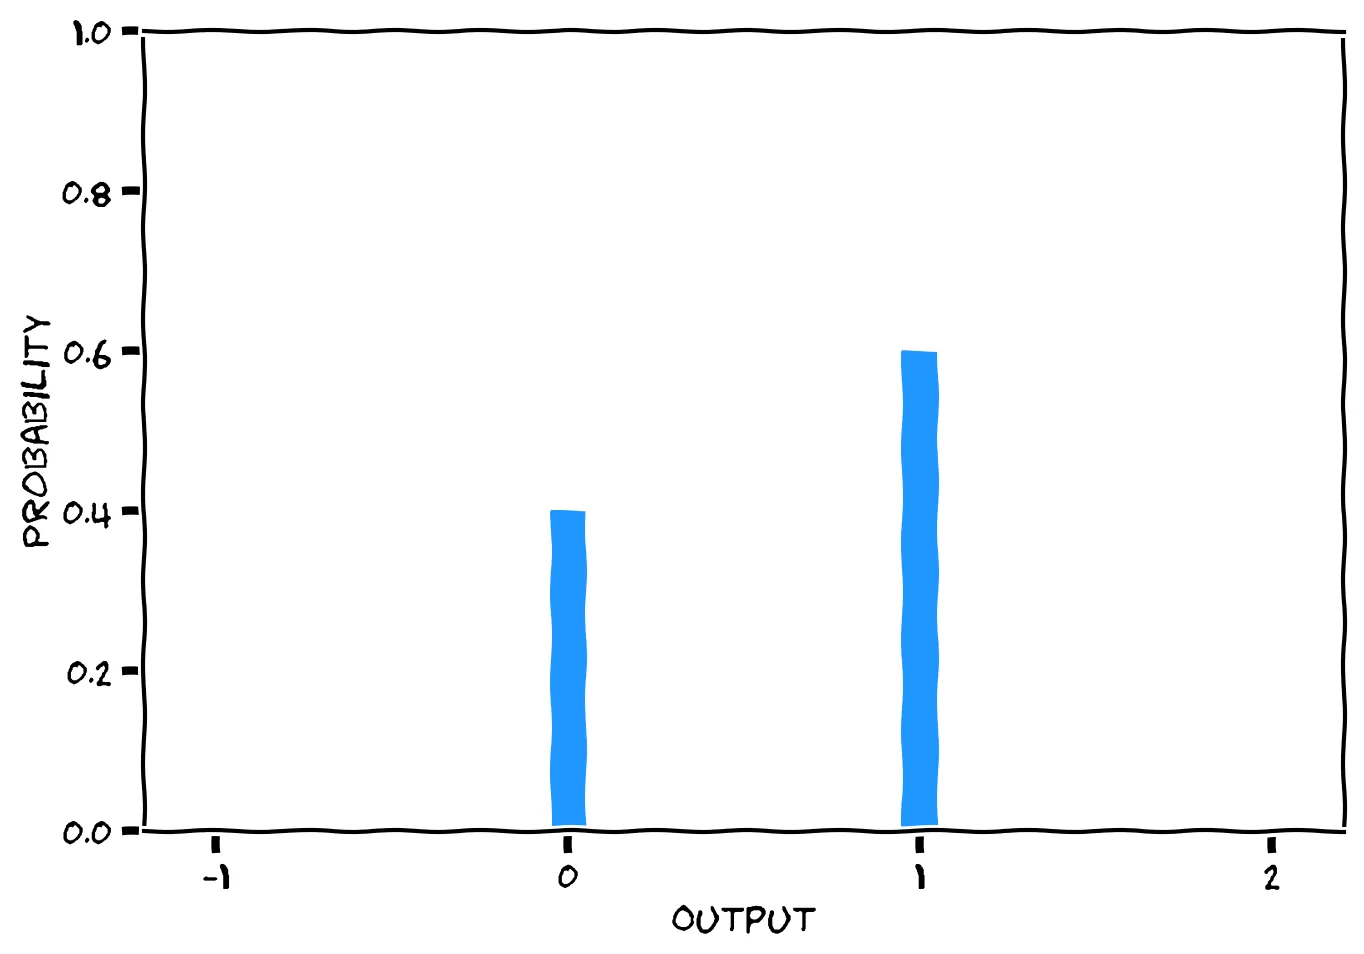 A bar plot. The x-axis is “Output” and the y-axis is “Probability”. The bar for output 0 has height 0.4. The bar for output 1 has height 0.6.